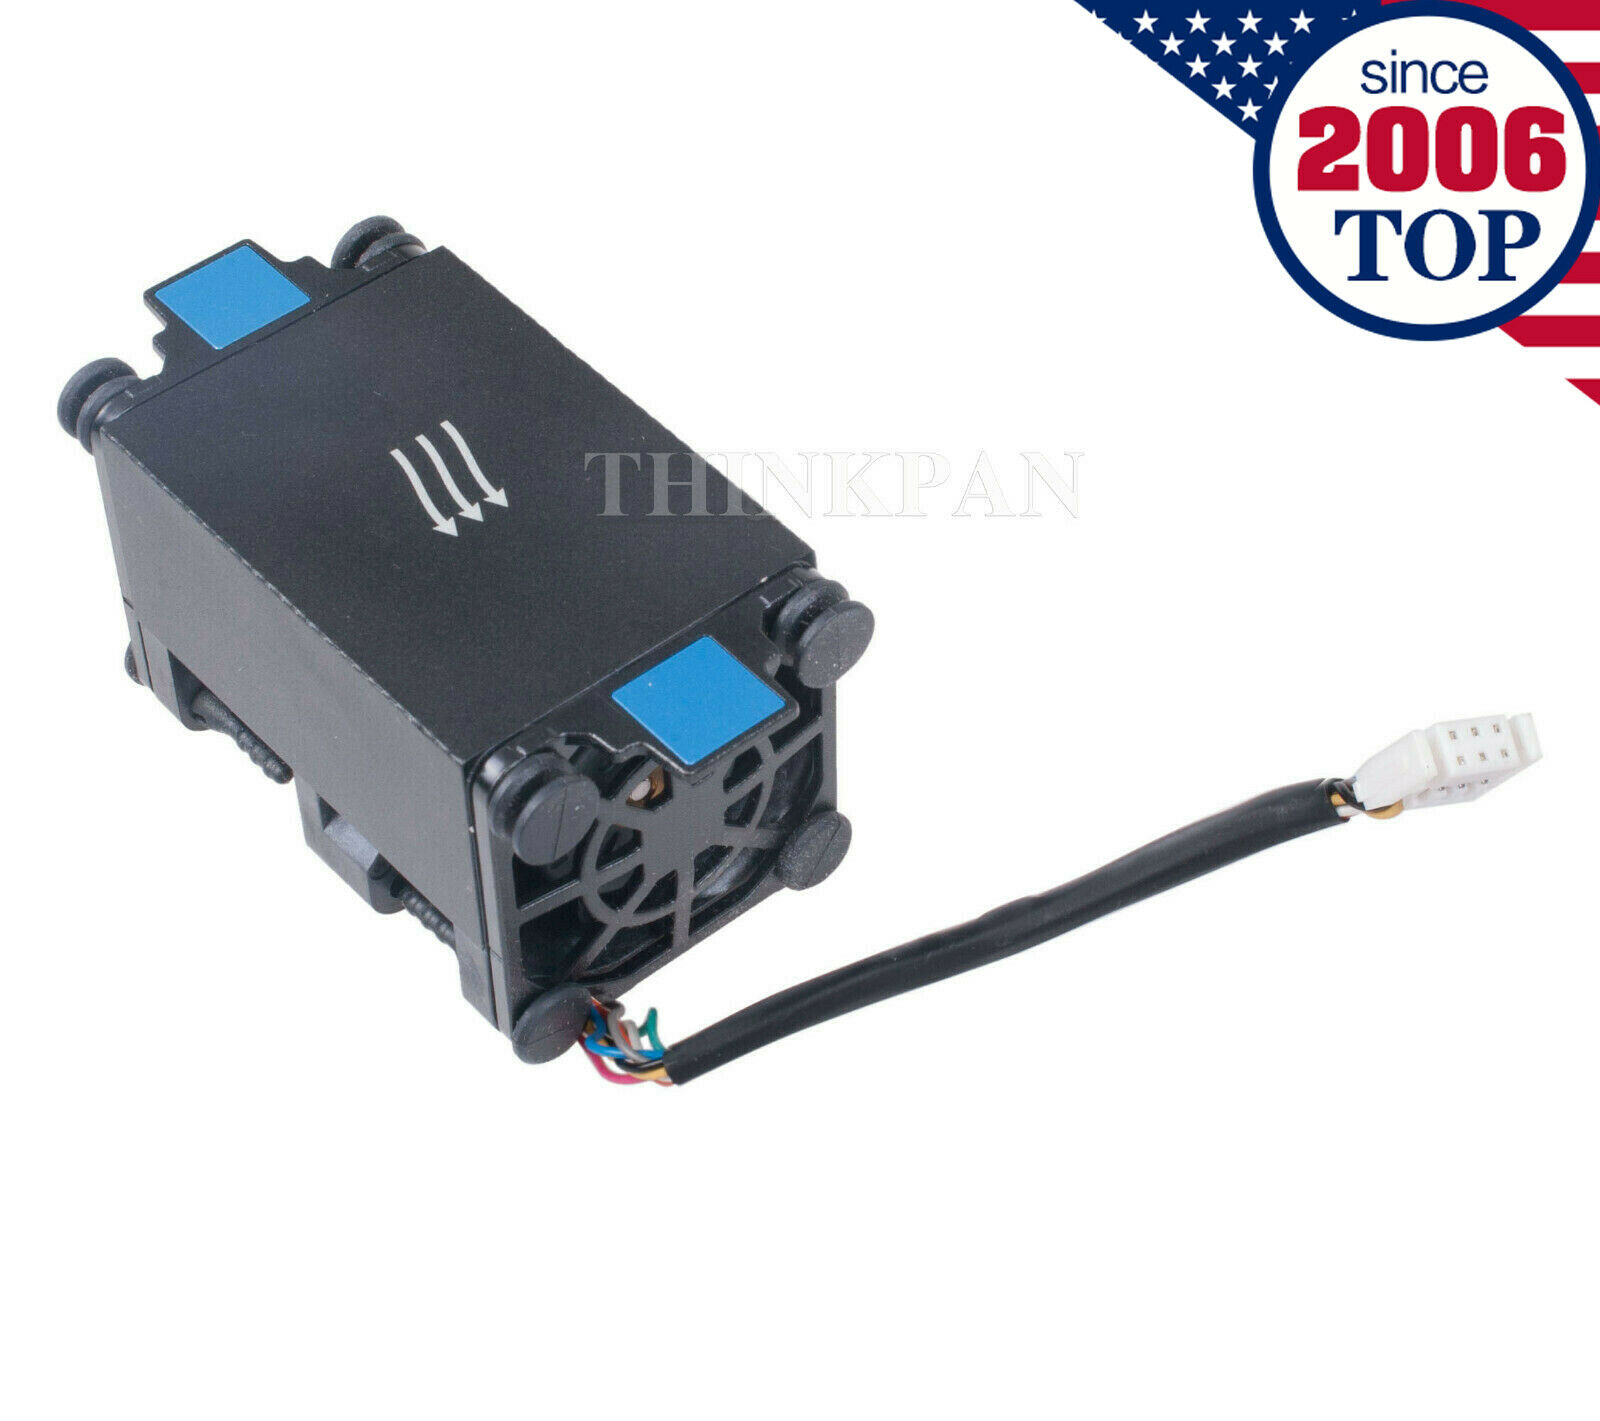 New Cooling Fan for HP DL320E G8 675449-001 675449-002 US Shipping - serverpartspicker.com